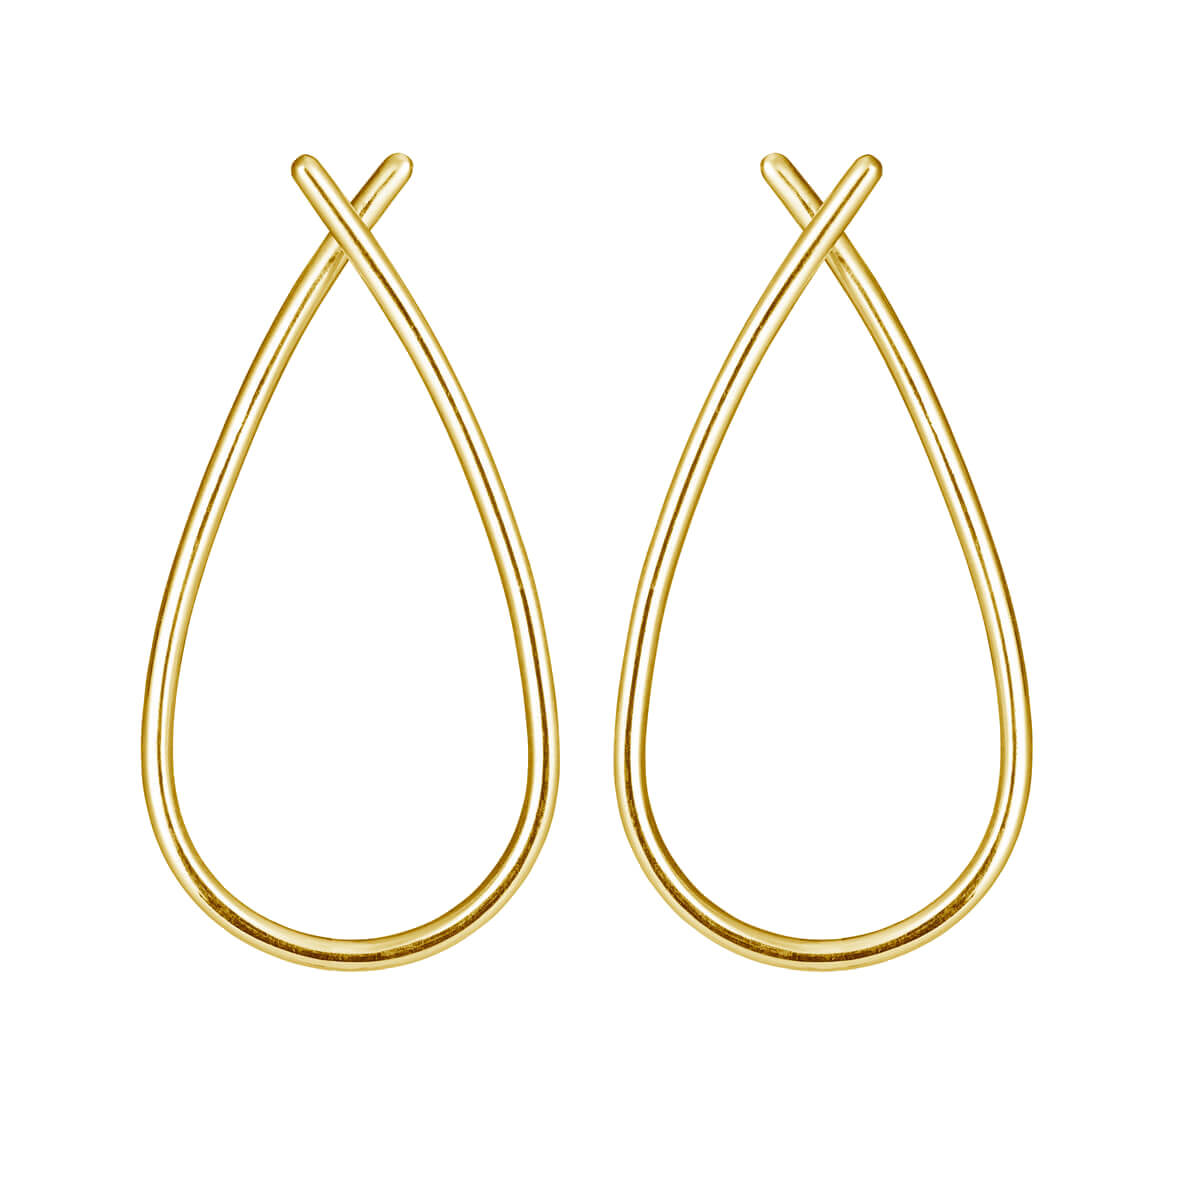 Large cross earring in polished gold plated silver / 5361-21